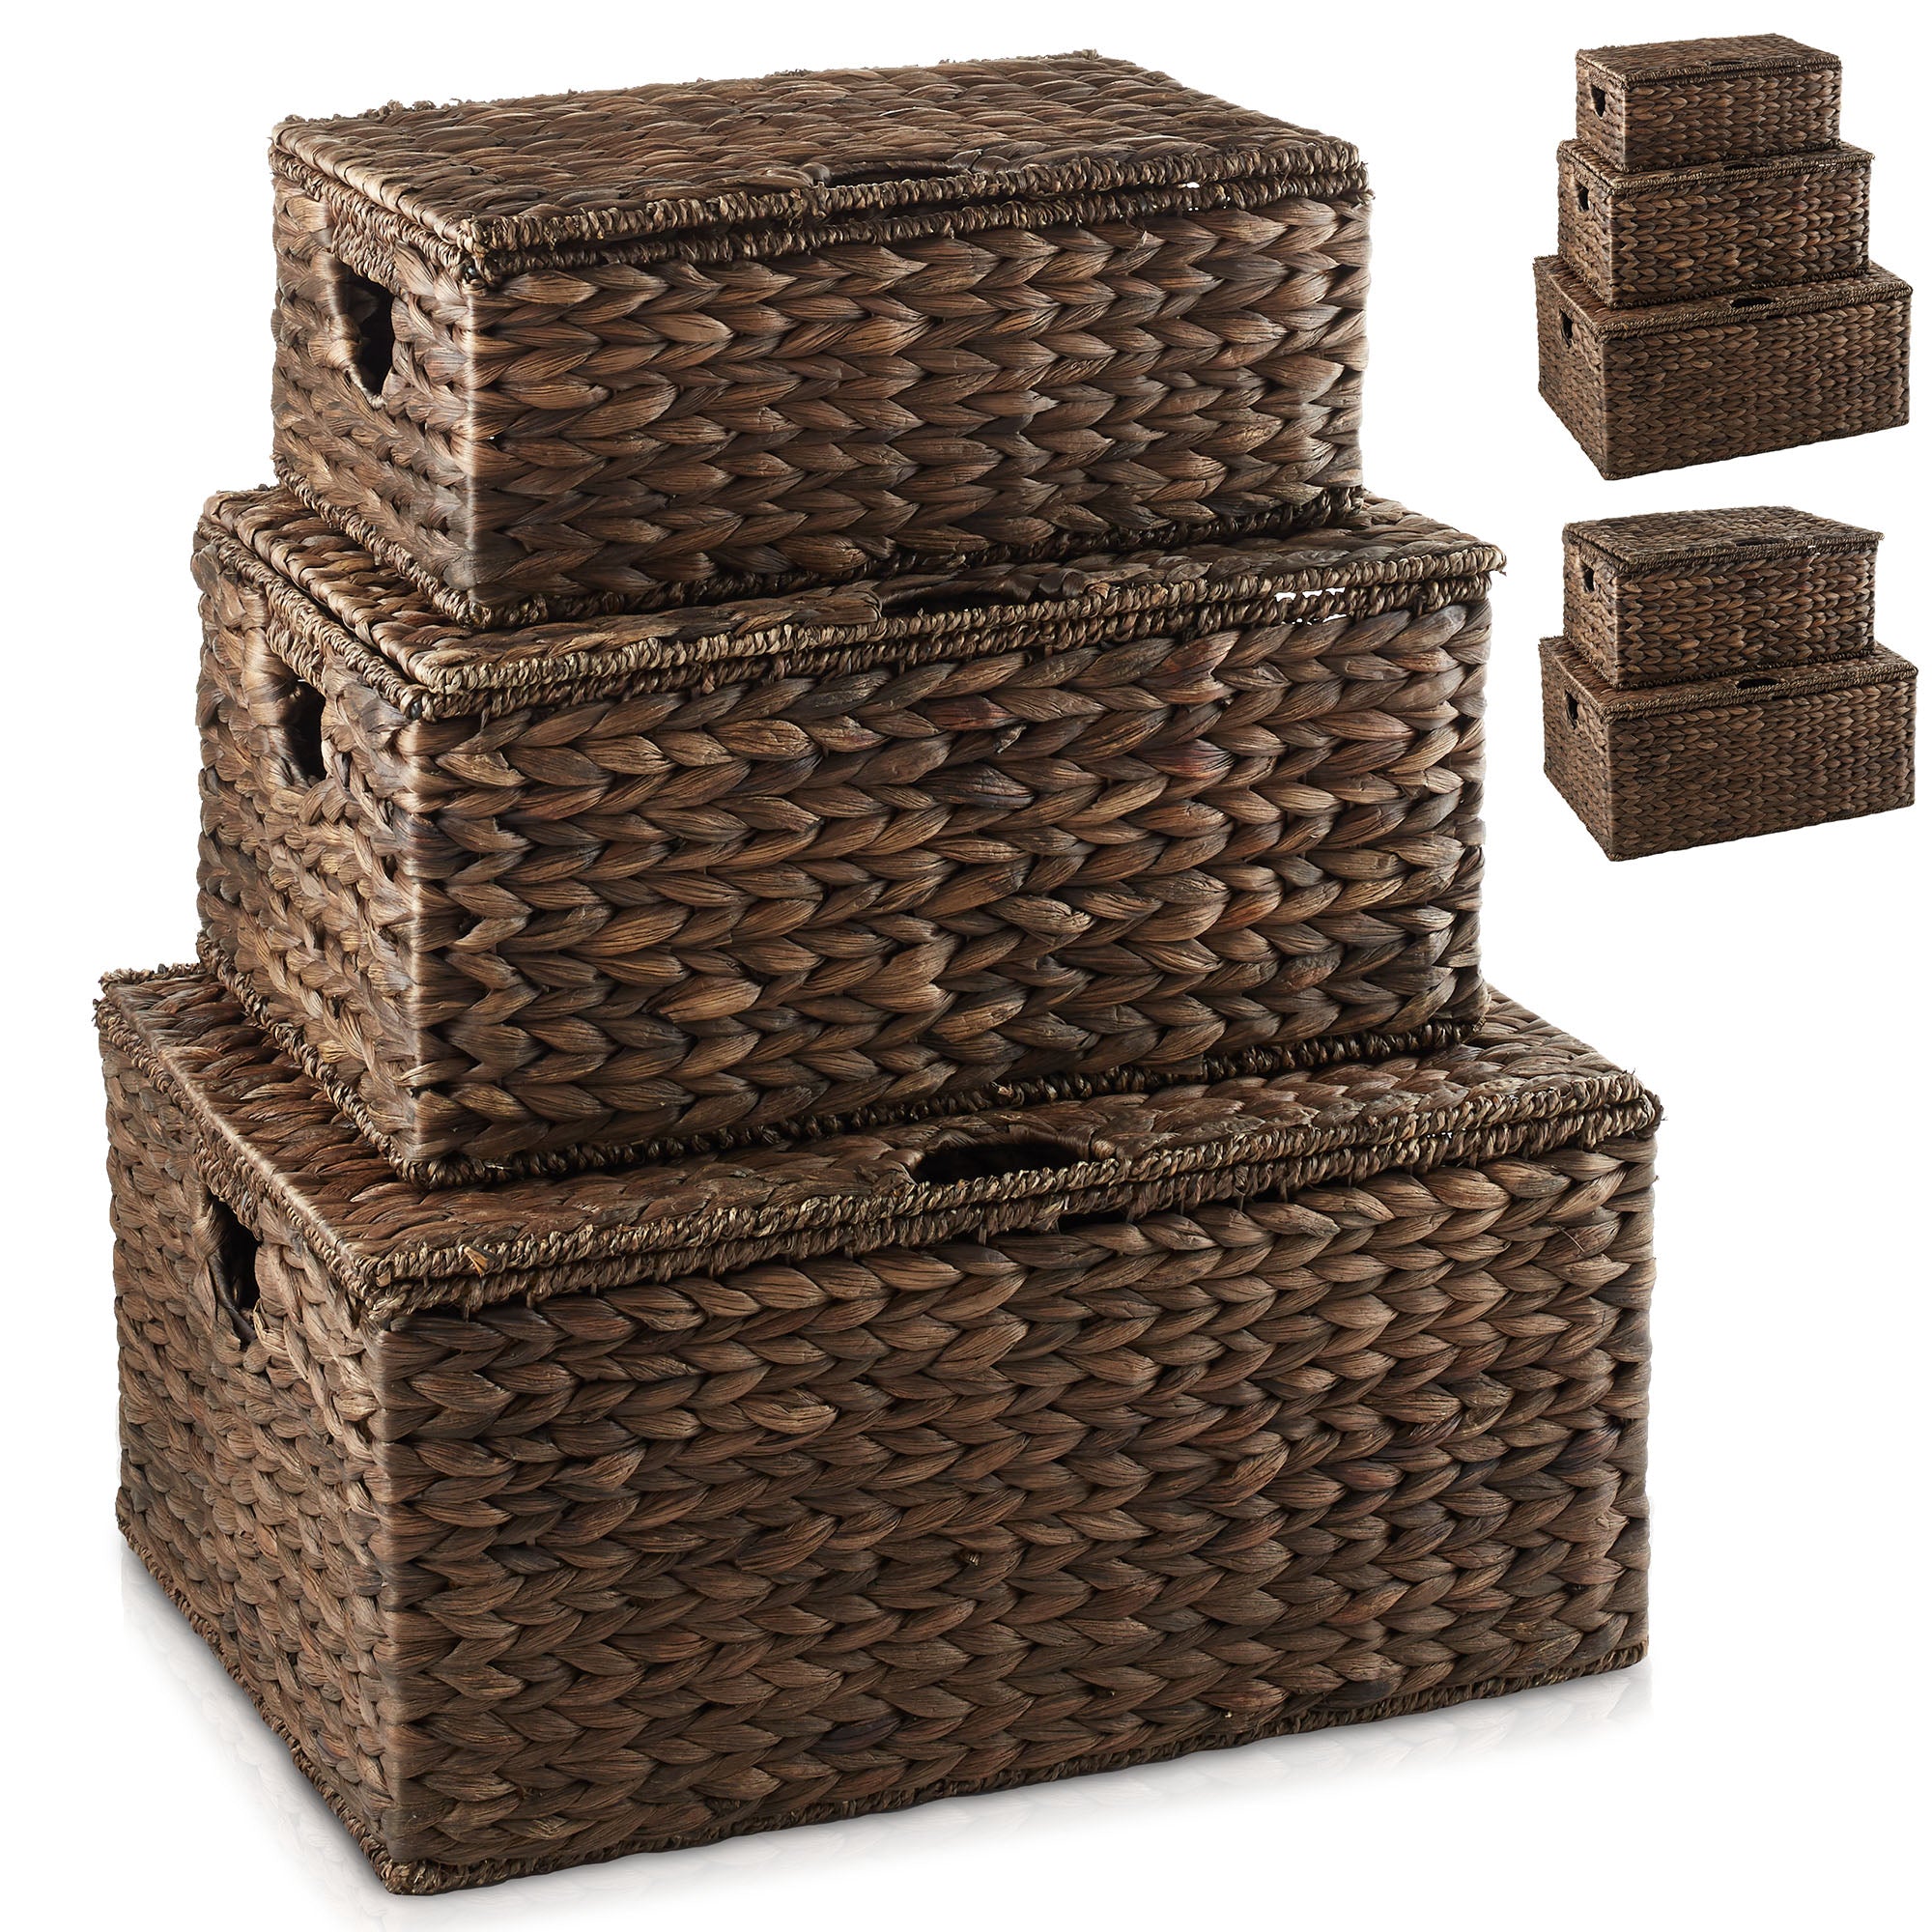 Casafield Set of 12 Collapsible Fabric Storage Cube Bins, Brown - 11 Foldable Cloth Baskets for Shelves and Cubby Organizers